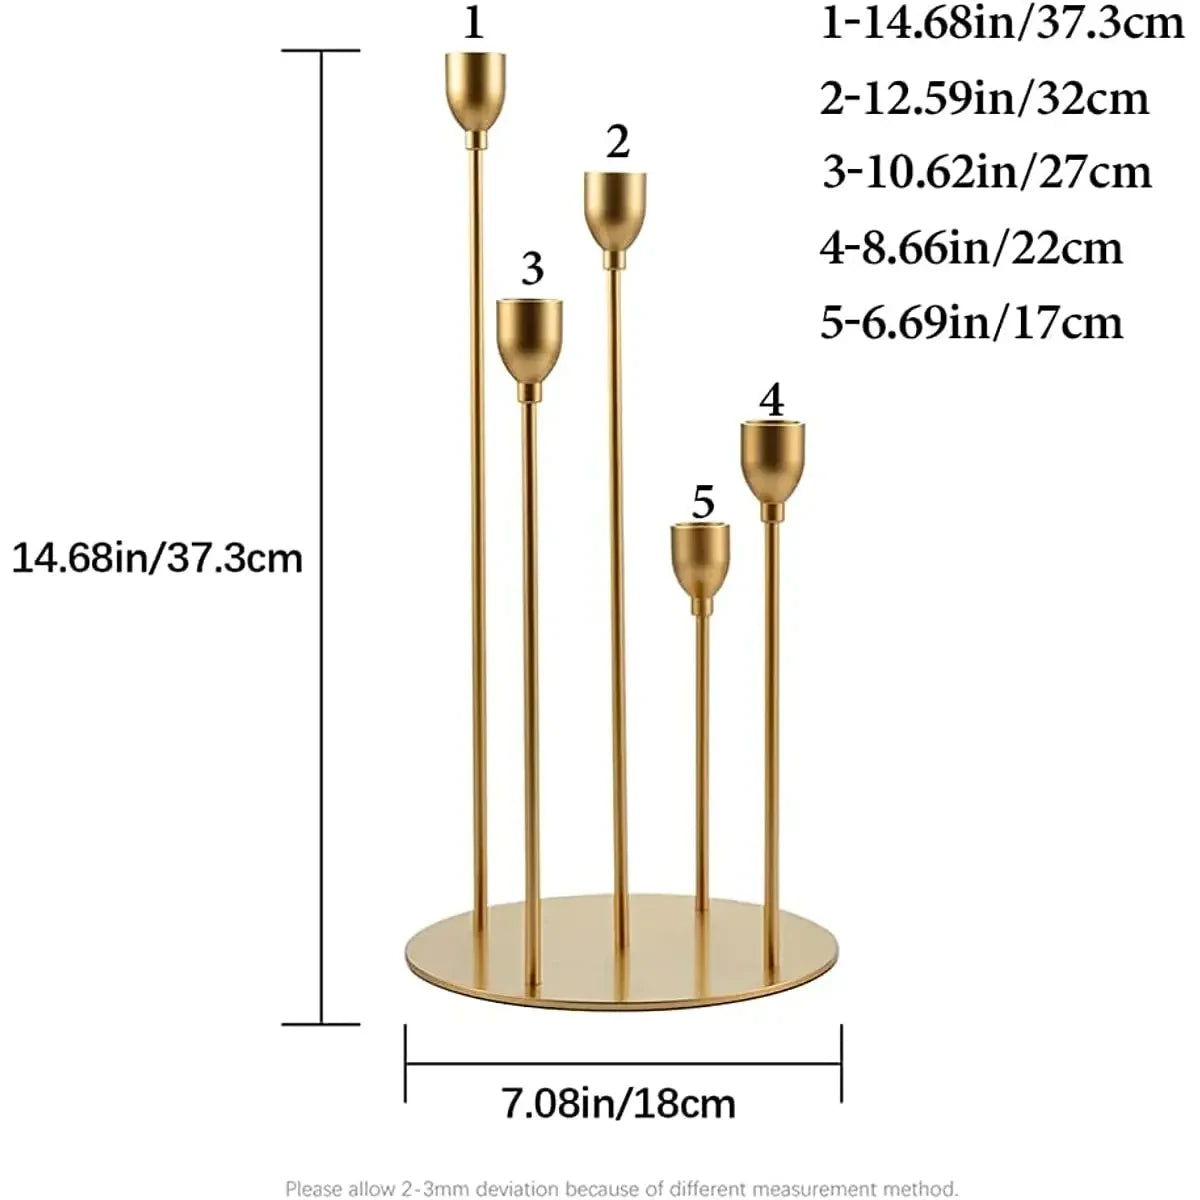 Gold 5 Arms Candelabra Taper Candle Holders for Table Centerpieces, Metal Candlestick Holder for Wedding Christmas Party Decor